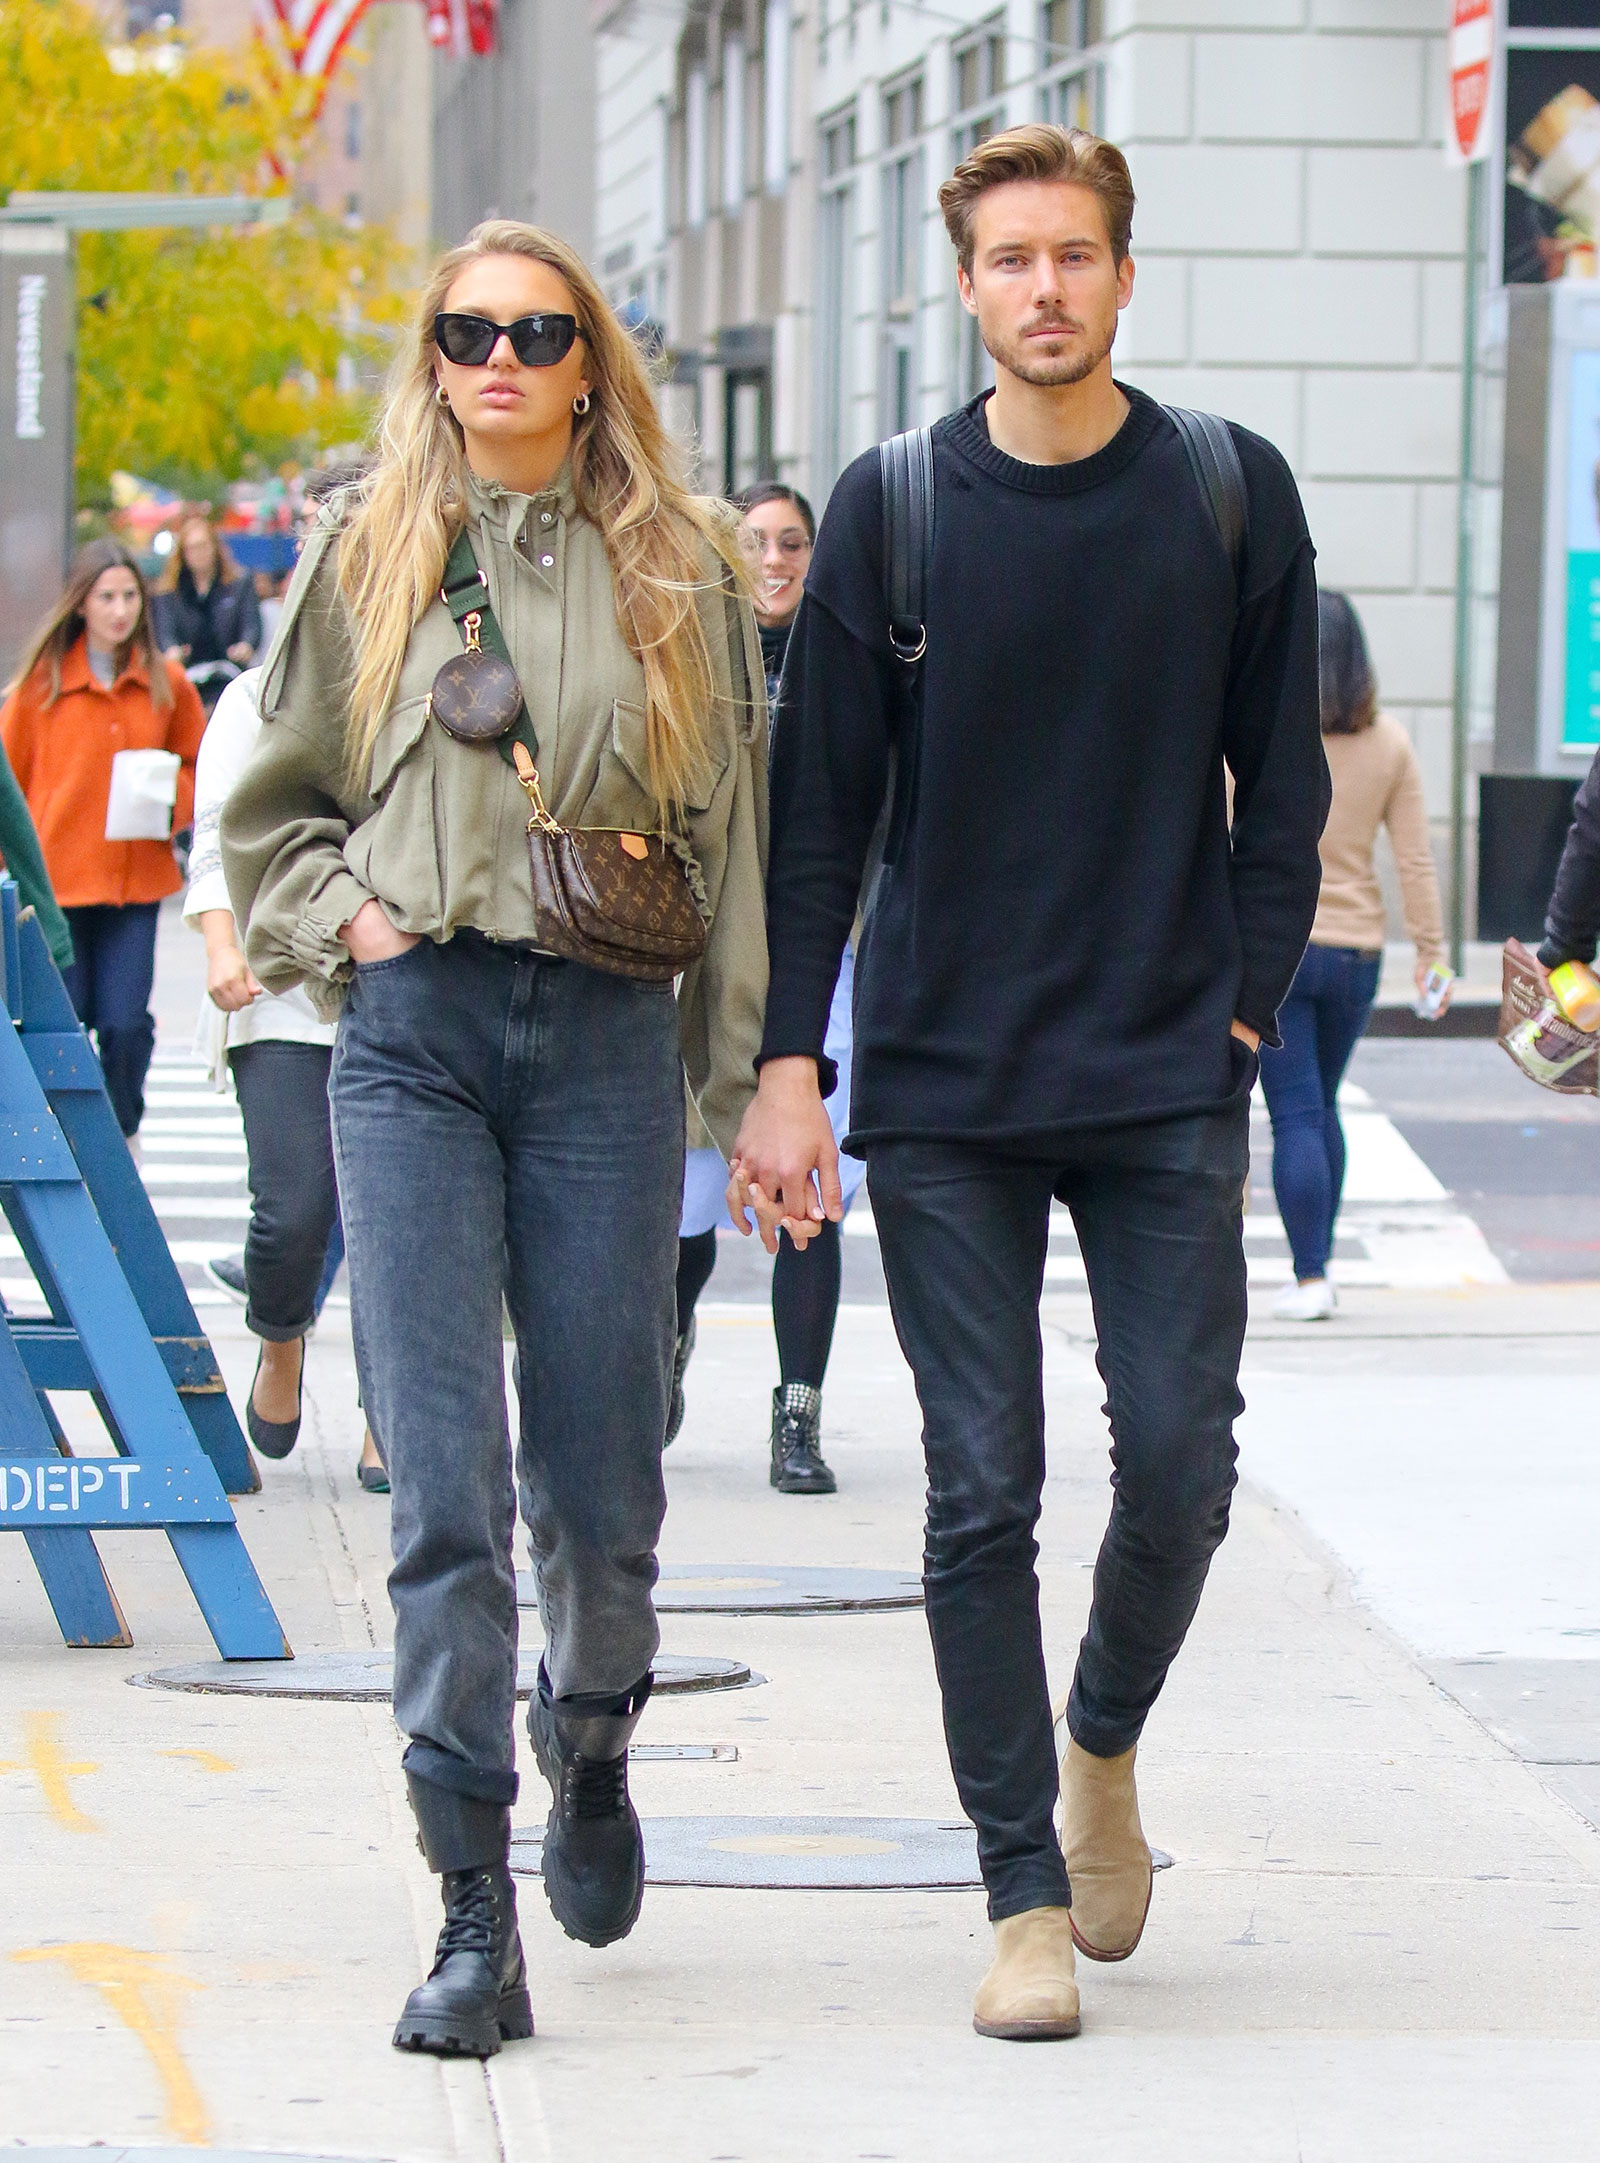 Romee Strijd's olive jacket, mom jeans and combat boots look for less